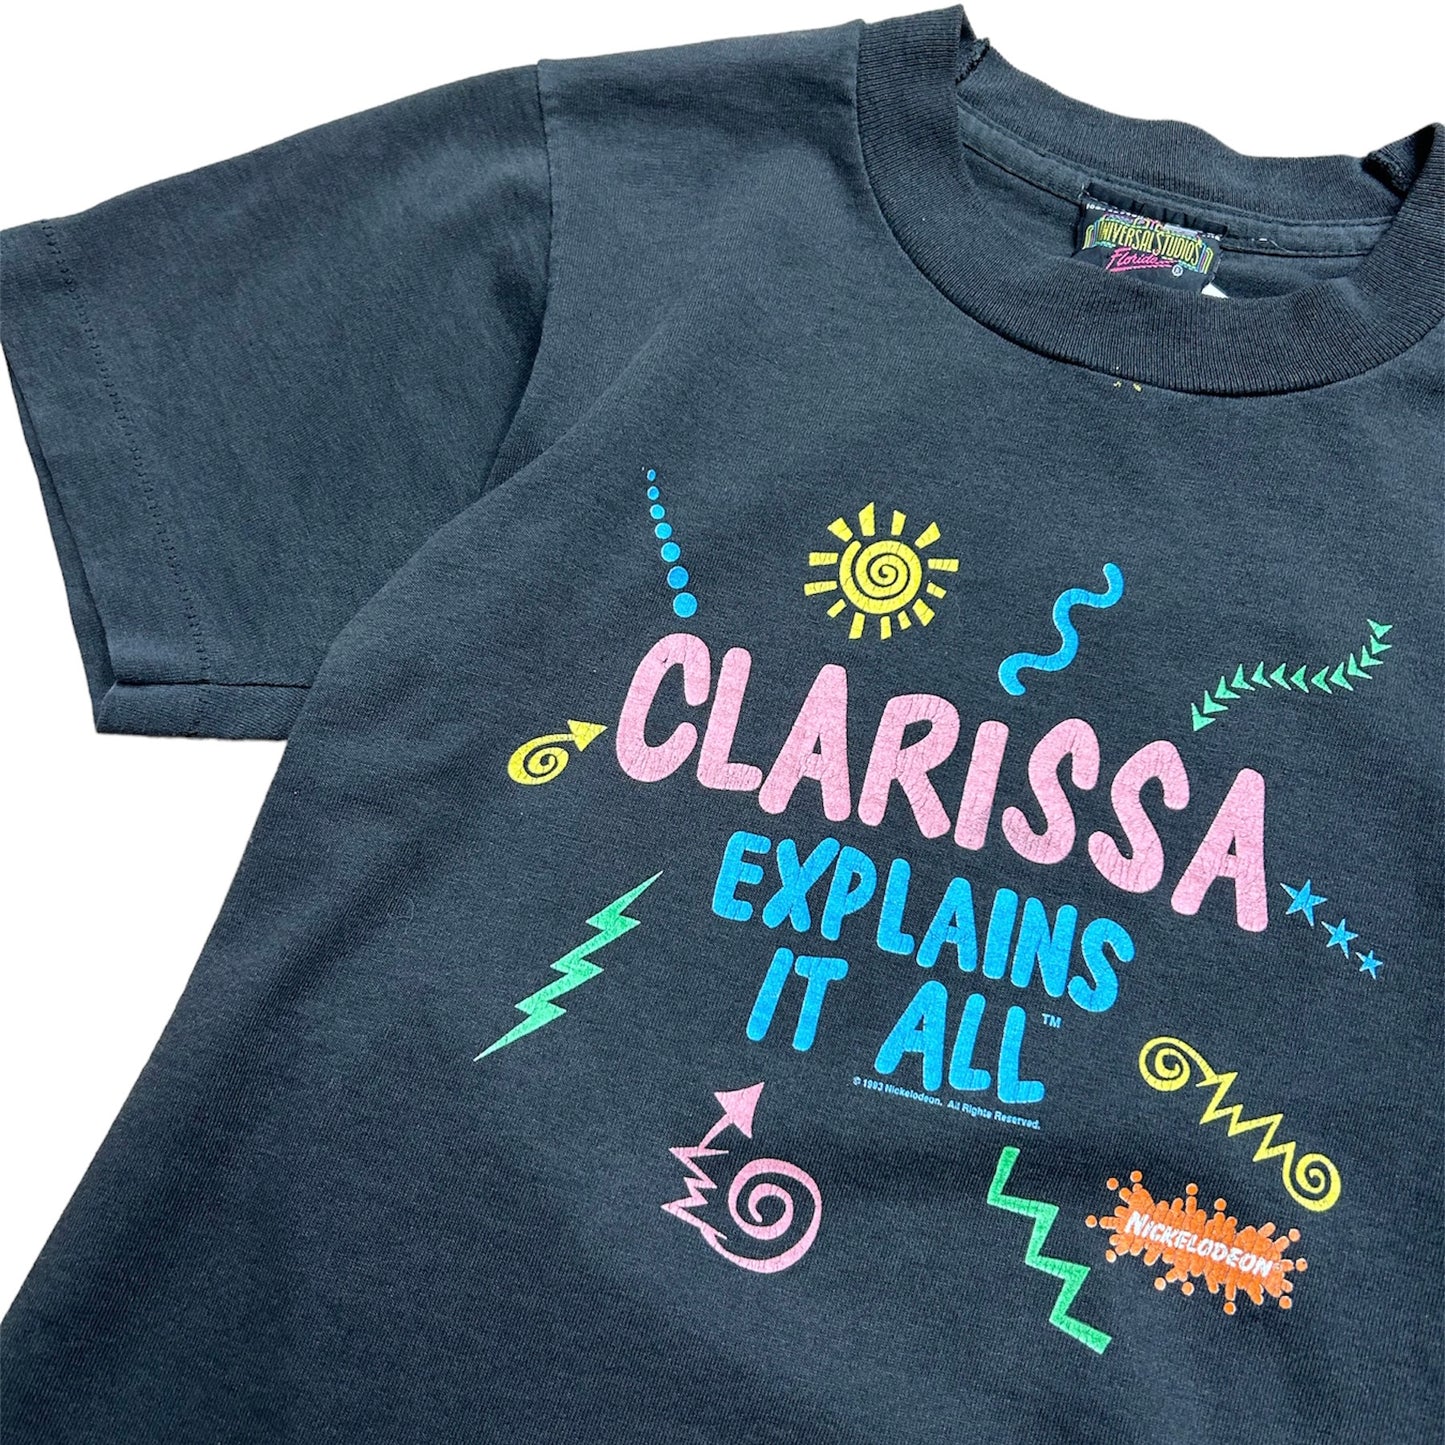 1993 Nickelodeon “Clarissa Explains It All” Youth Tee